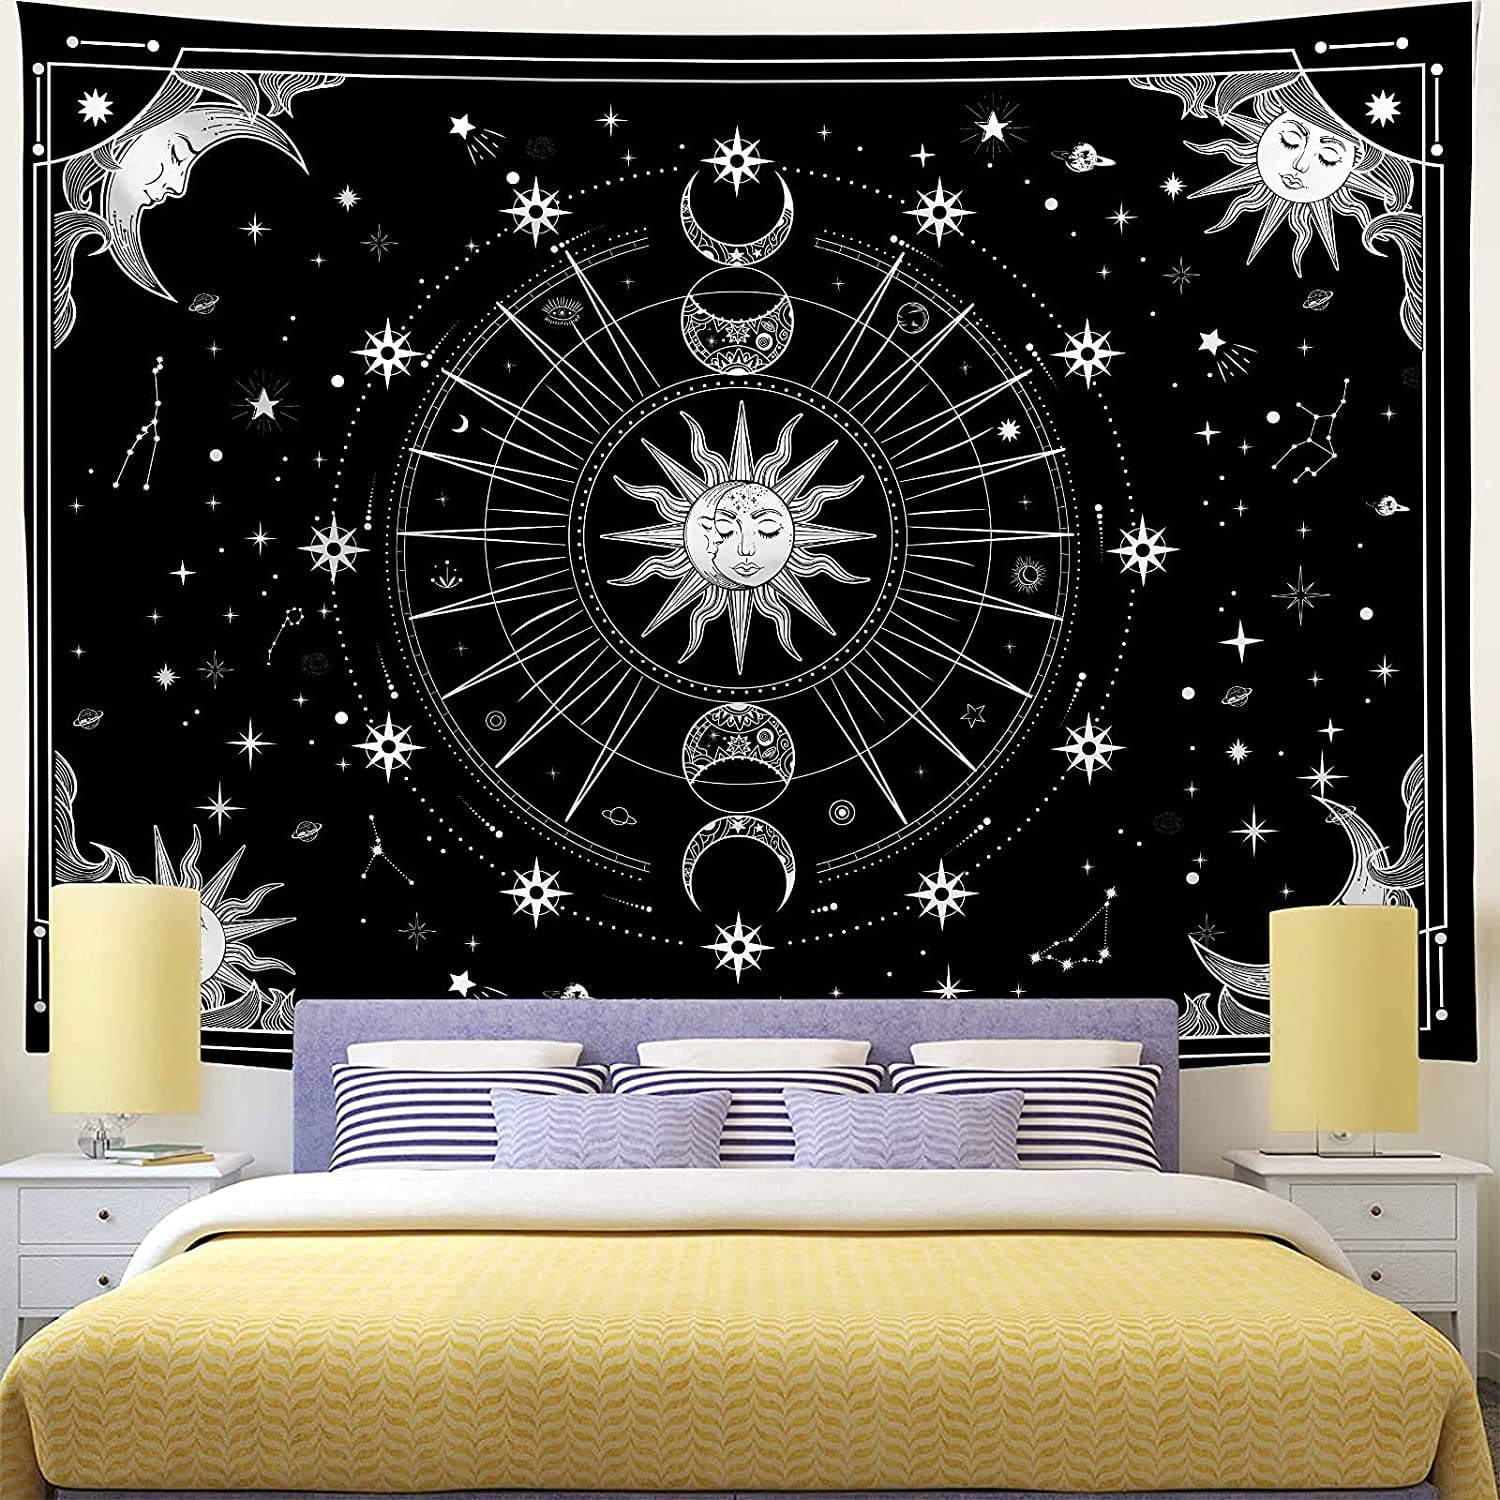 Fantastic Scenery Bedroom Tapestry Psychedelic Wall Hanging Tapestry Home Decor 